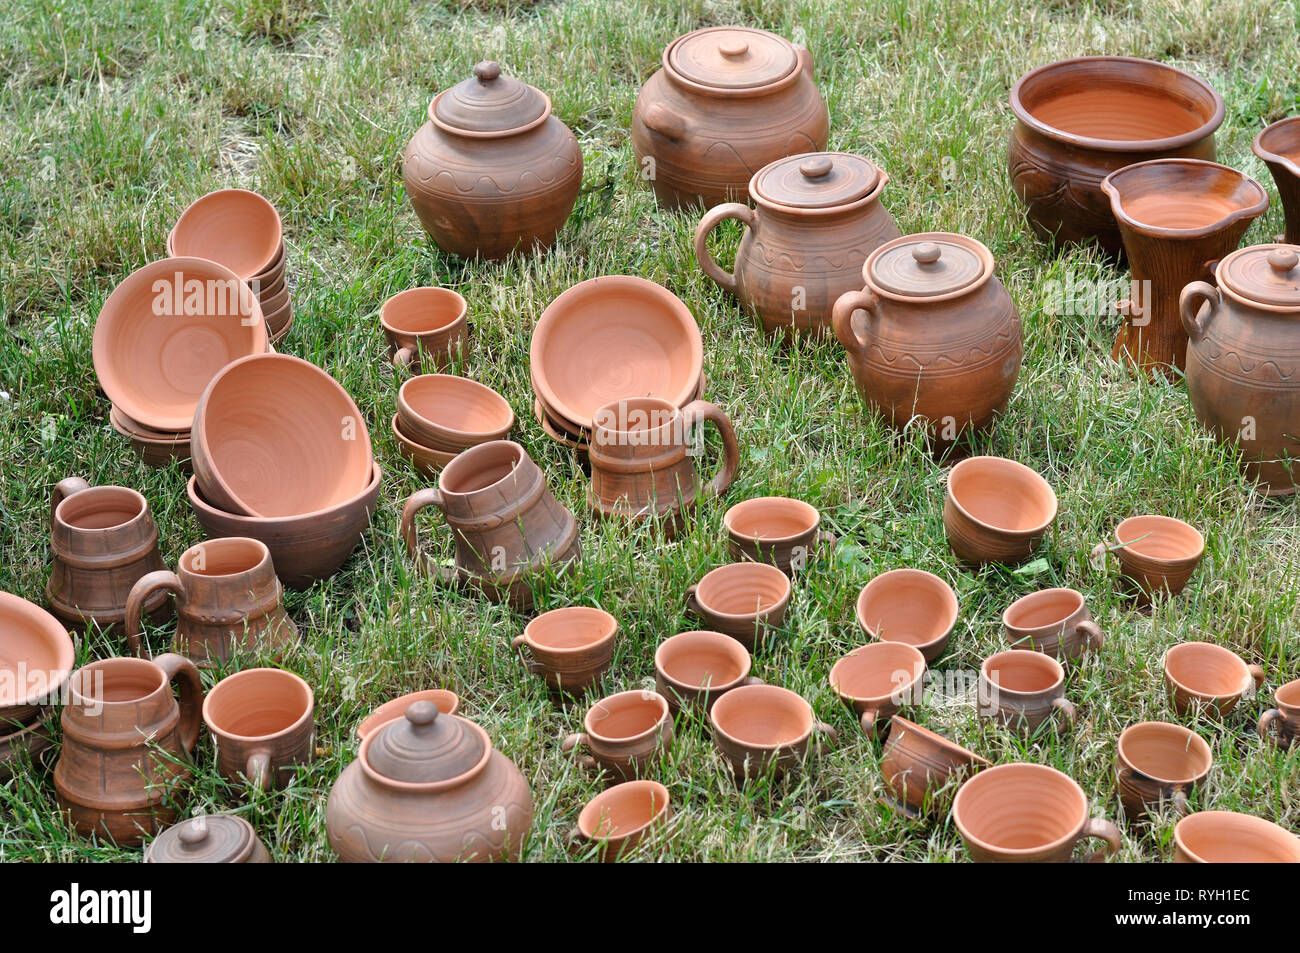 Lots of traditional ukrainian handmade clay pottery production on the green grass Stock Photo